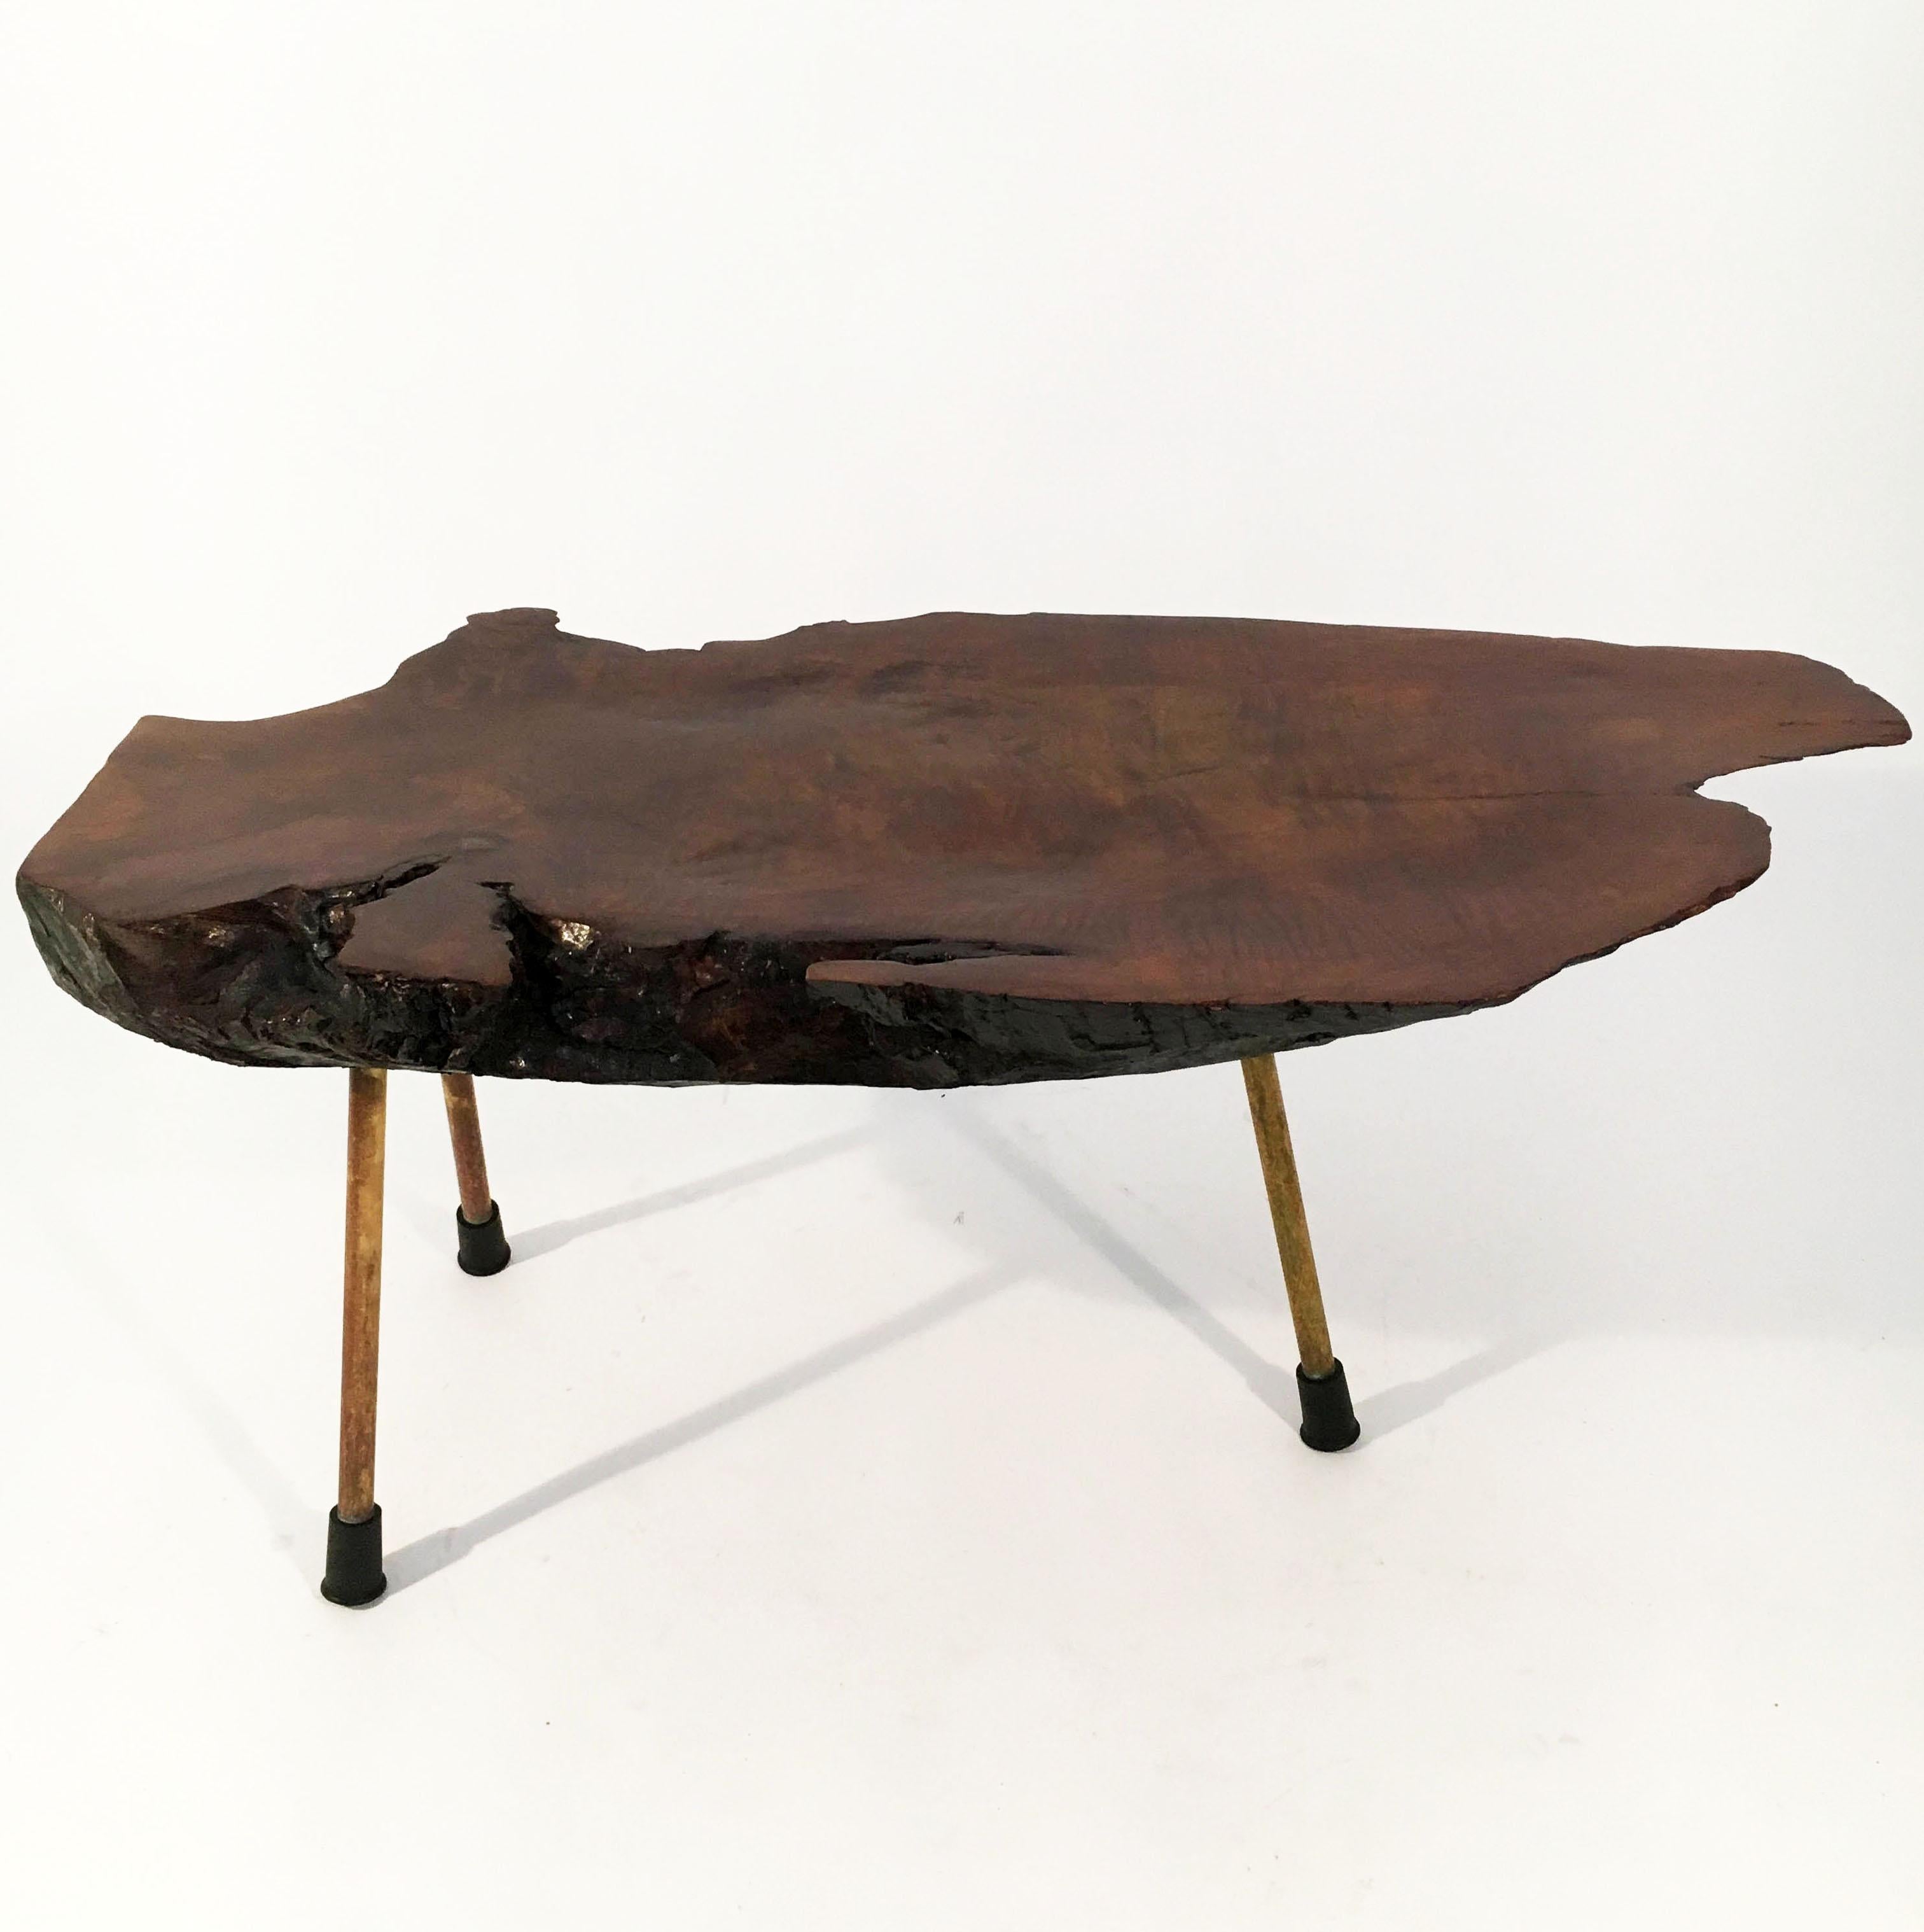 Carl Auböck II Original Large Walnut Tree Trunk Table 'Model No. 2' Austria, 1950s. Signed on the brass feet: Auböck. Each leg is numbered and the corresponding number is embossed into the slab of walnut tree trunk. An impressive and sculptural